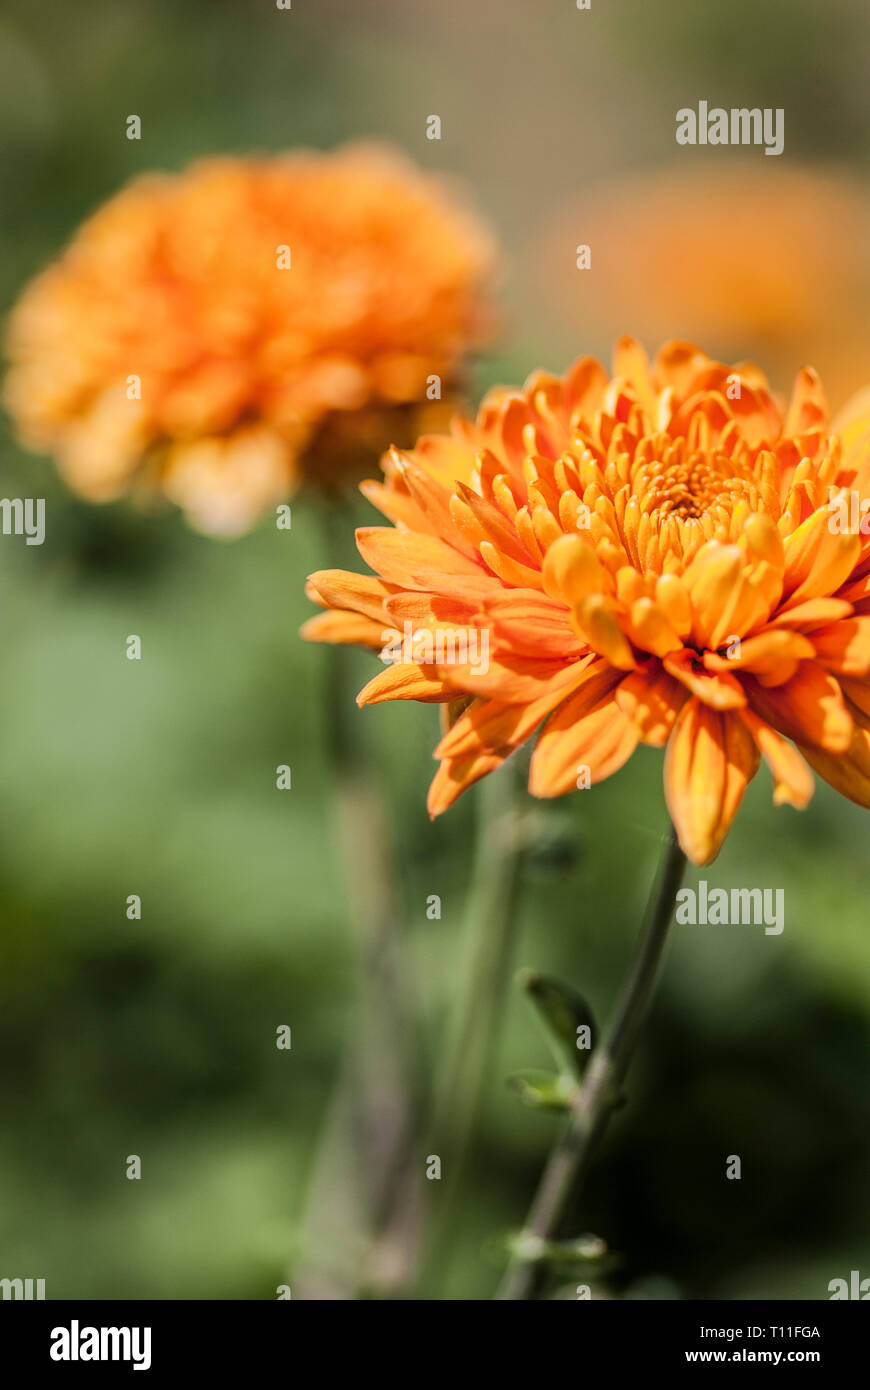 Orange Chrysantemum flower head, with a second blurred in the background, short depth of field Stock Photo